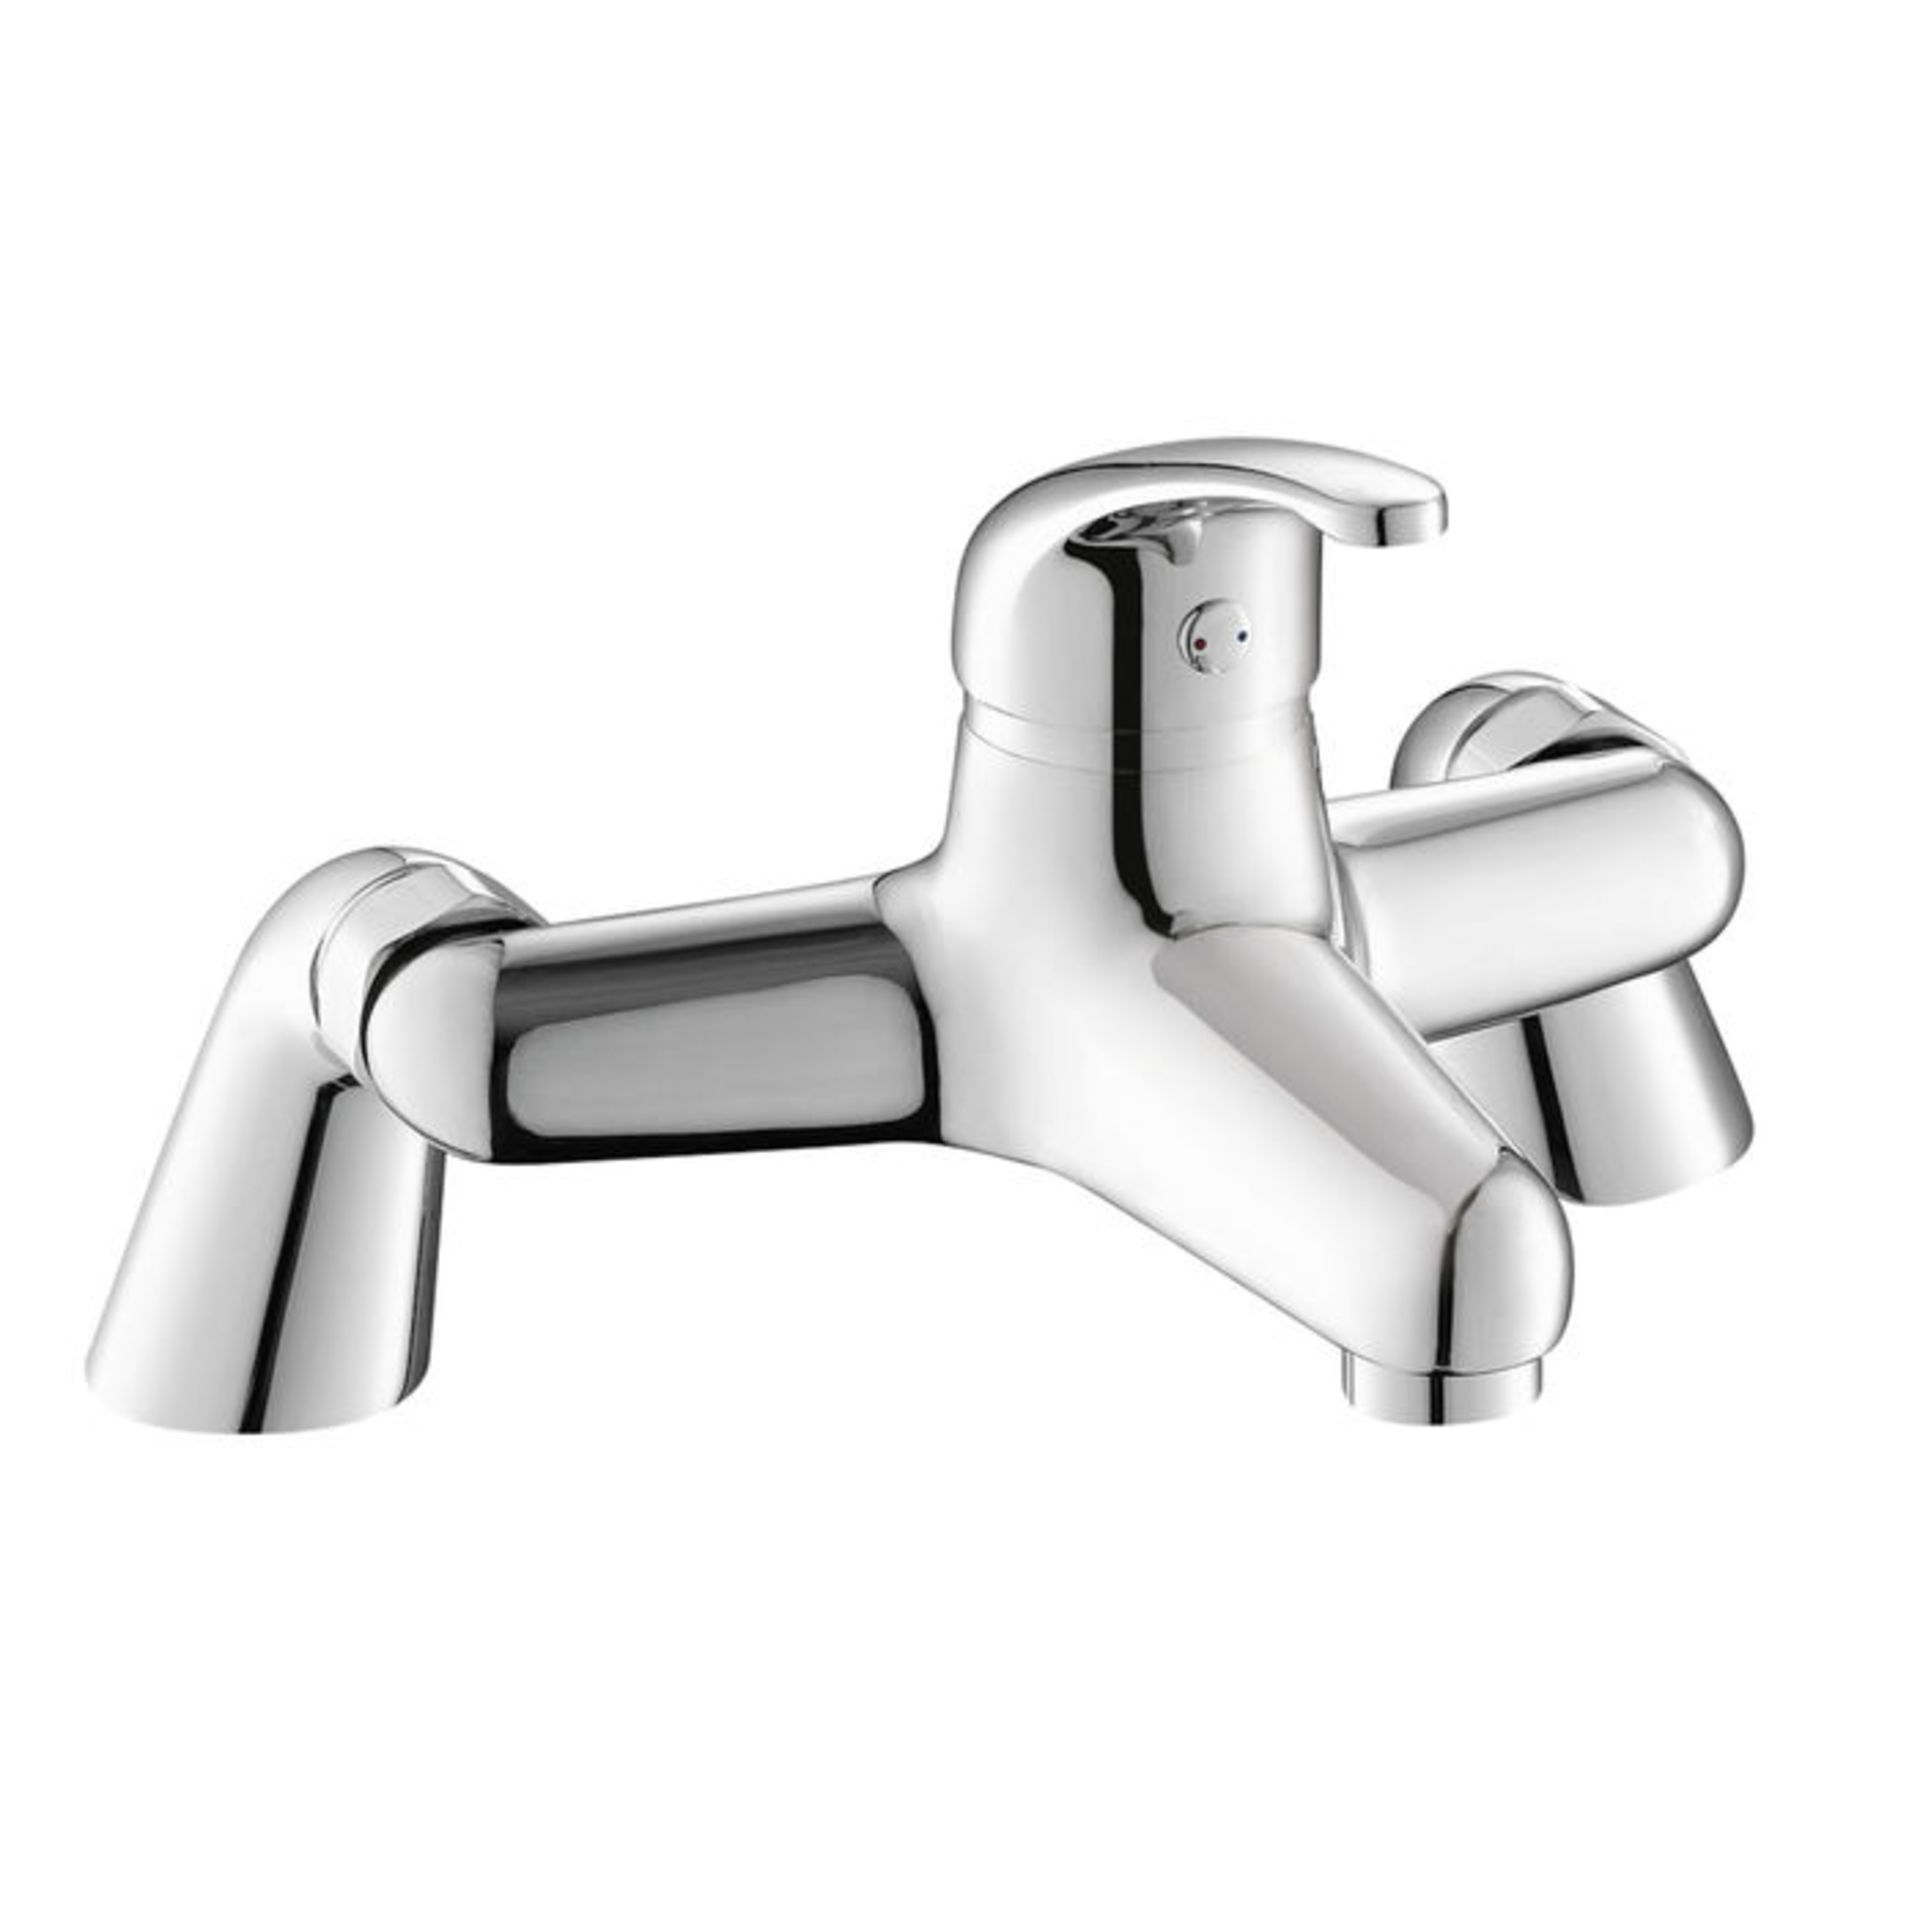 (V4) Sleek Bath Filler Mixer Tap. Chrome Plated Solid Brass 1/4 turn solid brass valve with